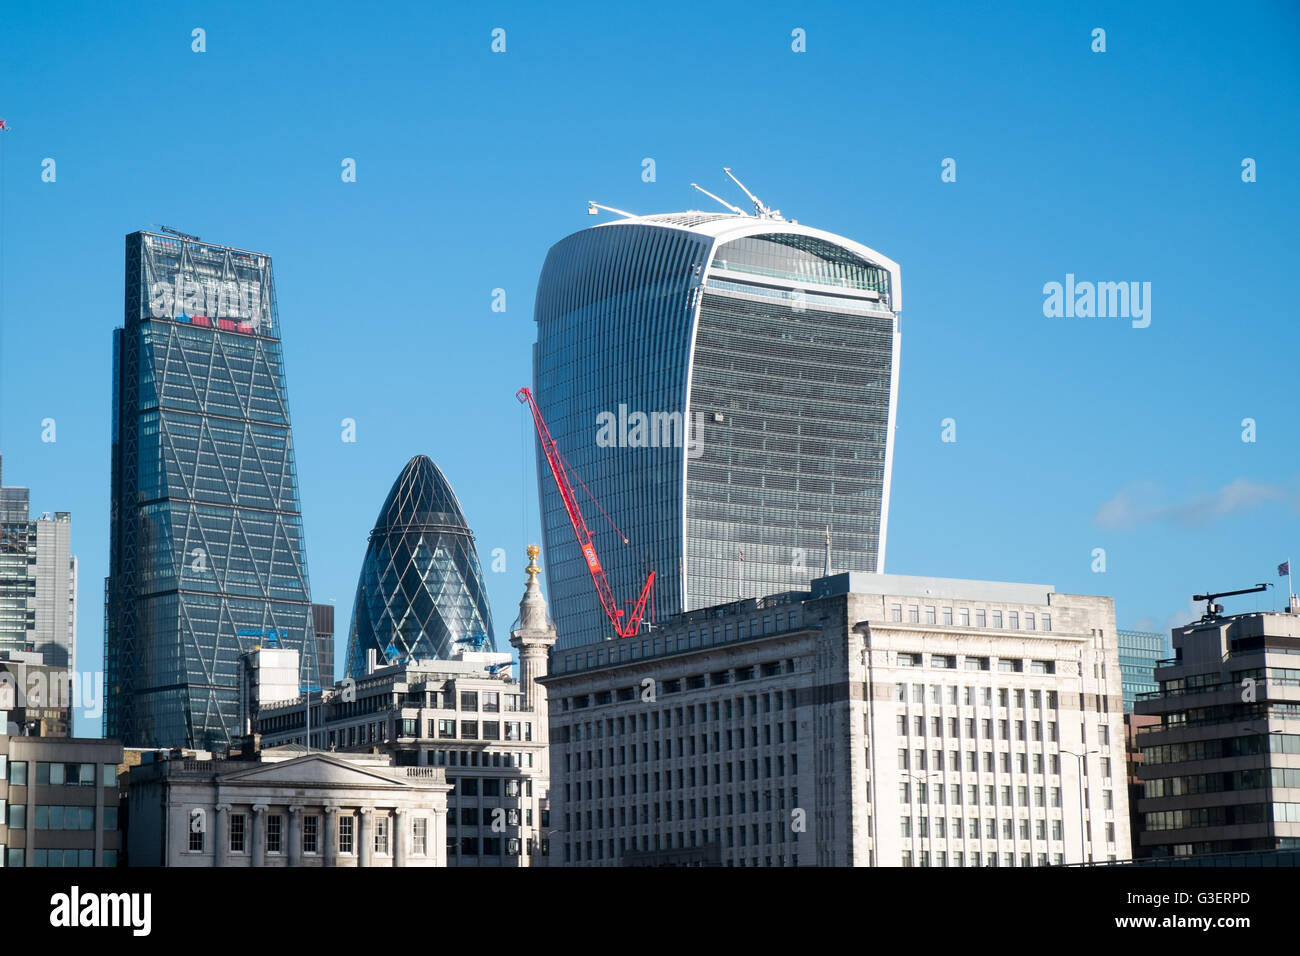 City of London gherkin,cheesegrater and walkie talkie buildings,London,England,europe Stock Photo